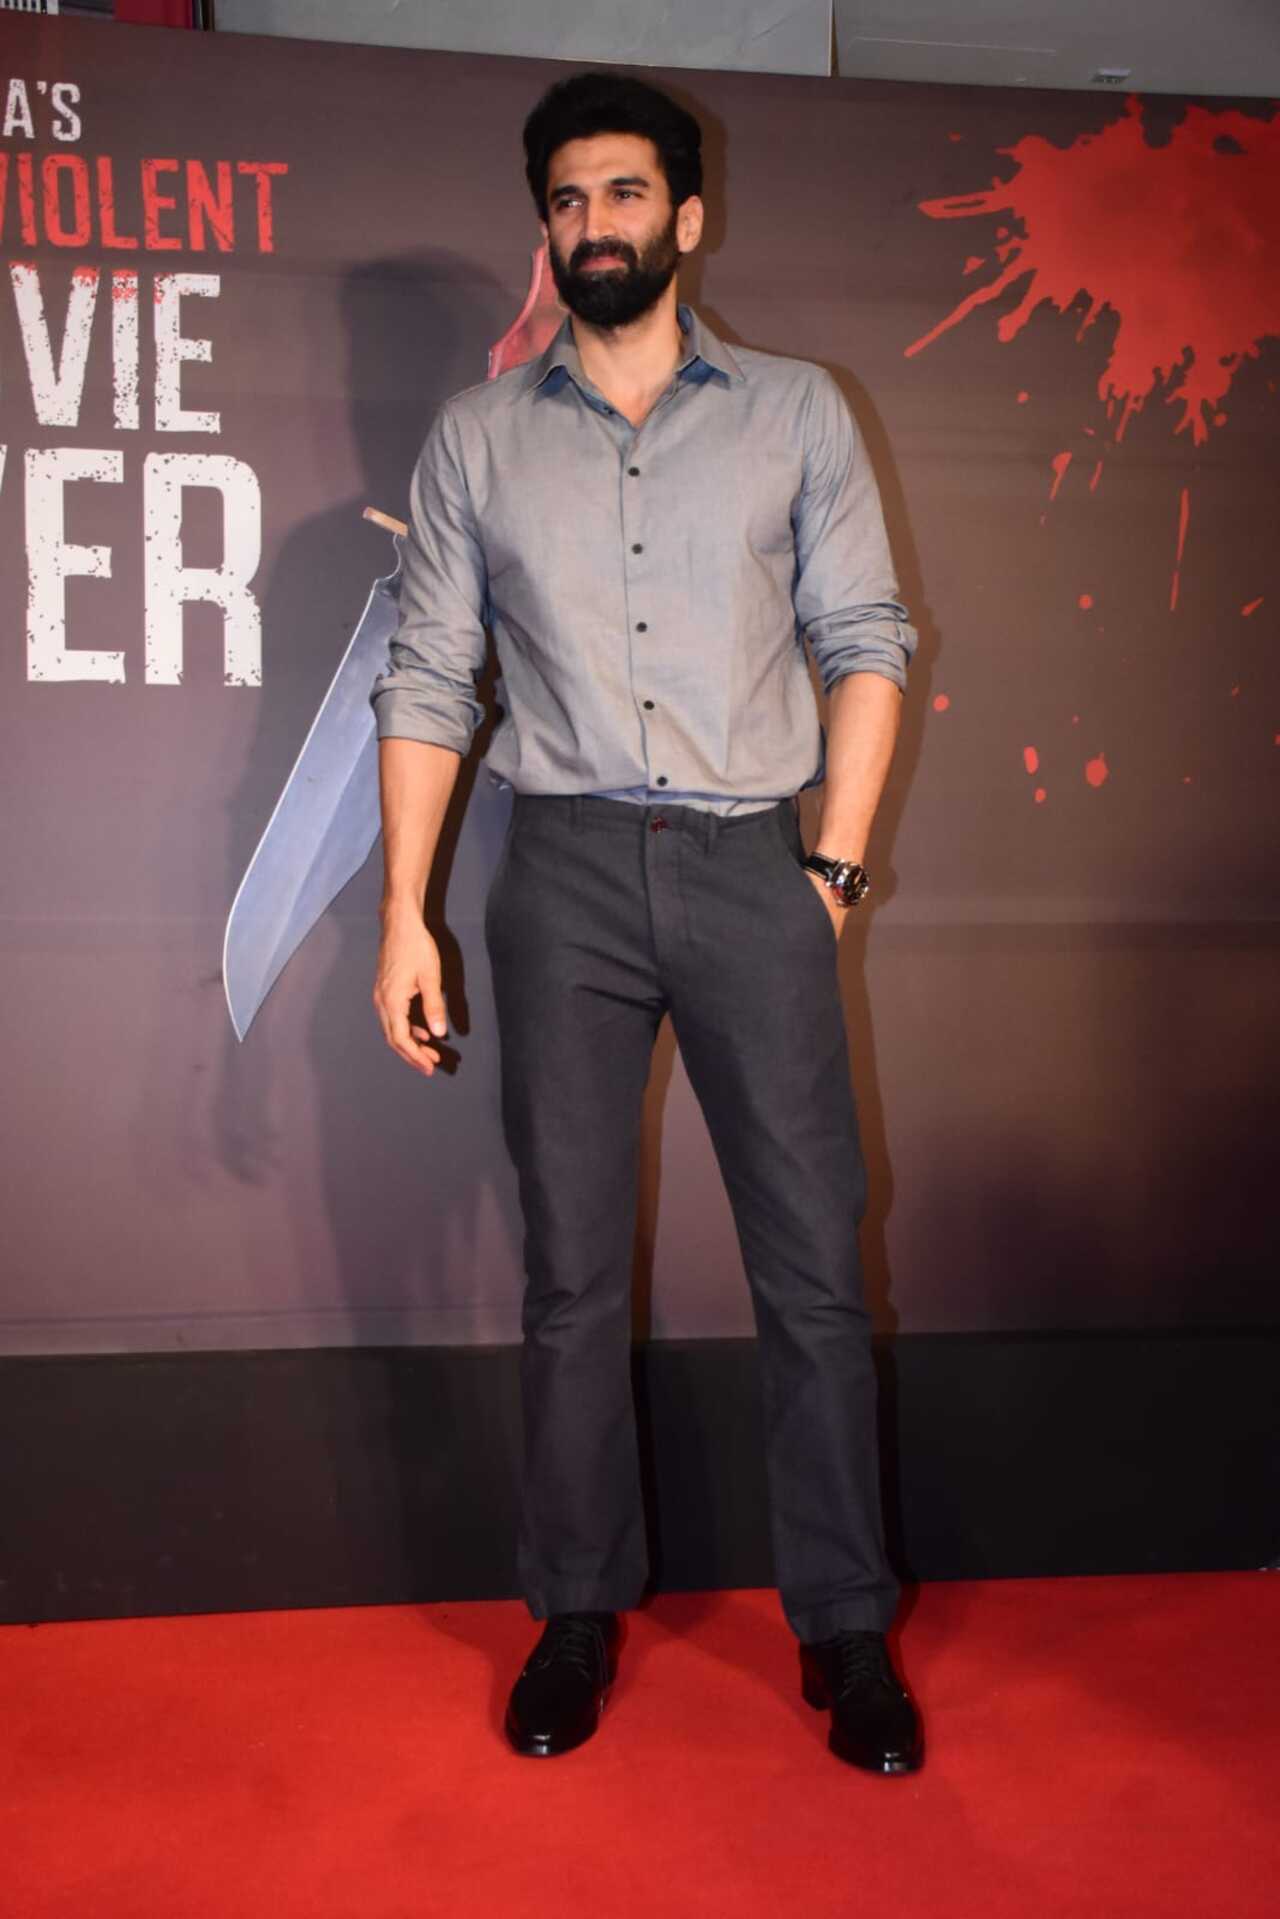 Actor Aditya Roy Kapur was also spotted at the event wearing a light grey formal shirt and dark grey trousers. 